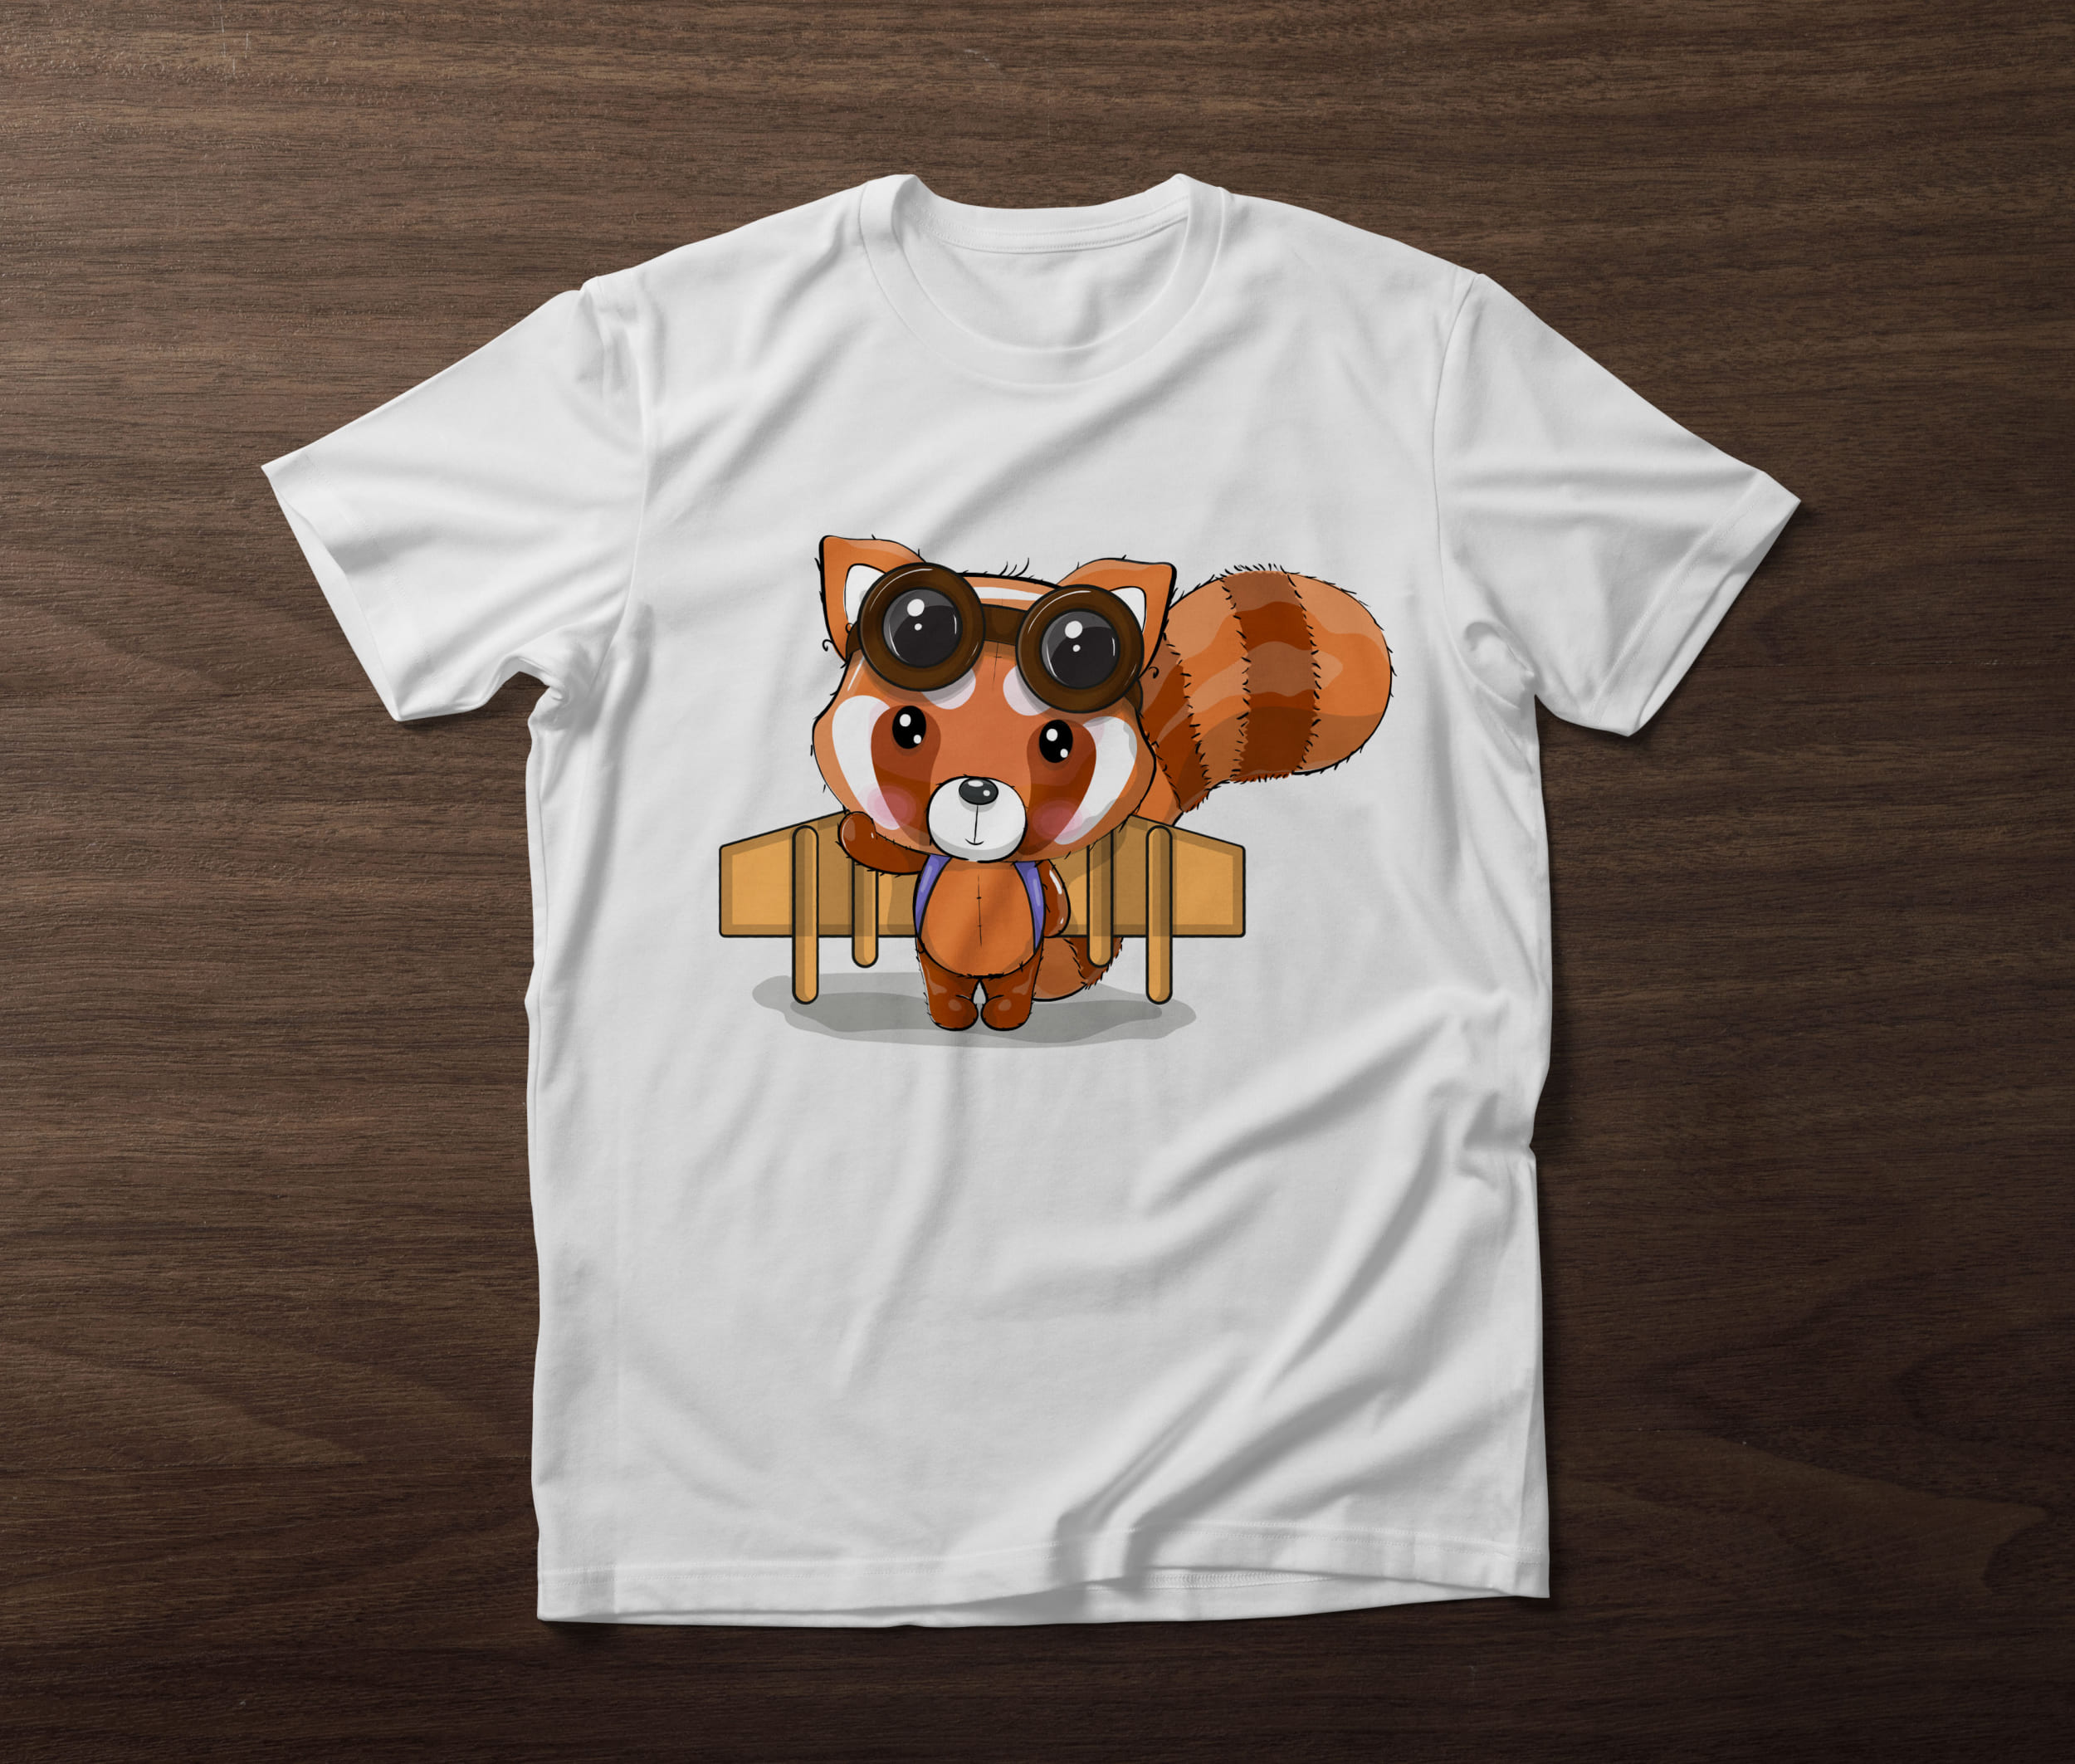 White t-shirt with a red panda traveler on a wooden background.